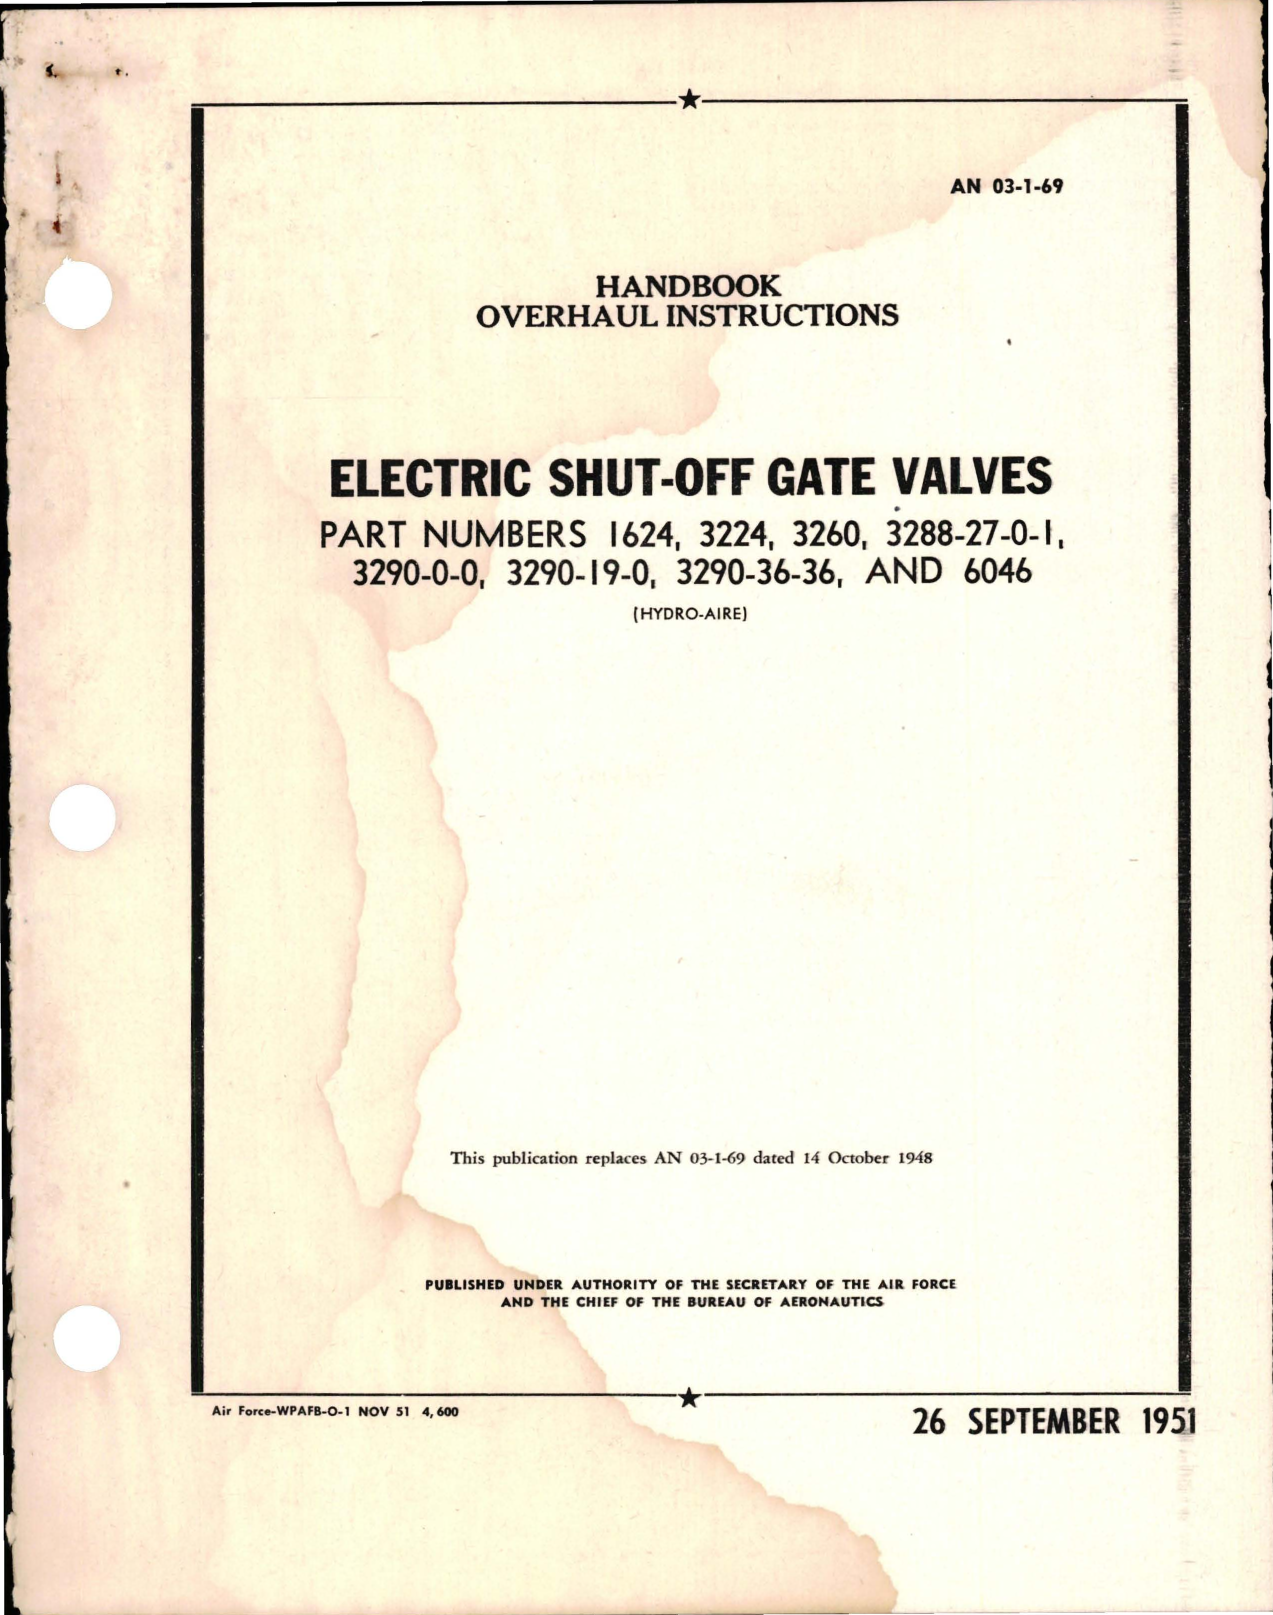 Sample page 1 from AirCorps Library document: Overhaul Instructions for Electric Shut-Off Gate Valves - Parts 